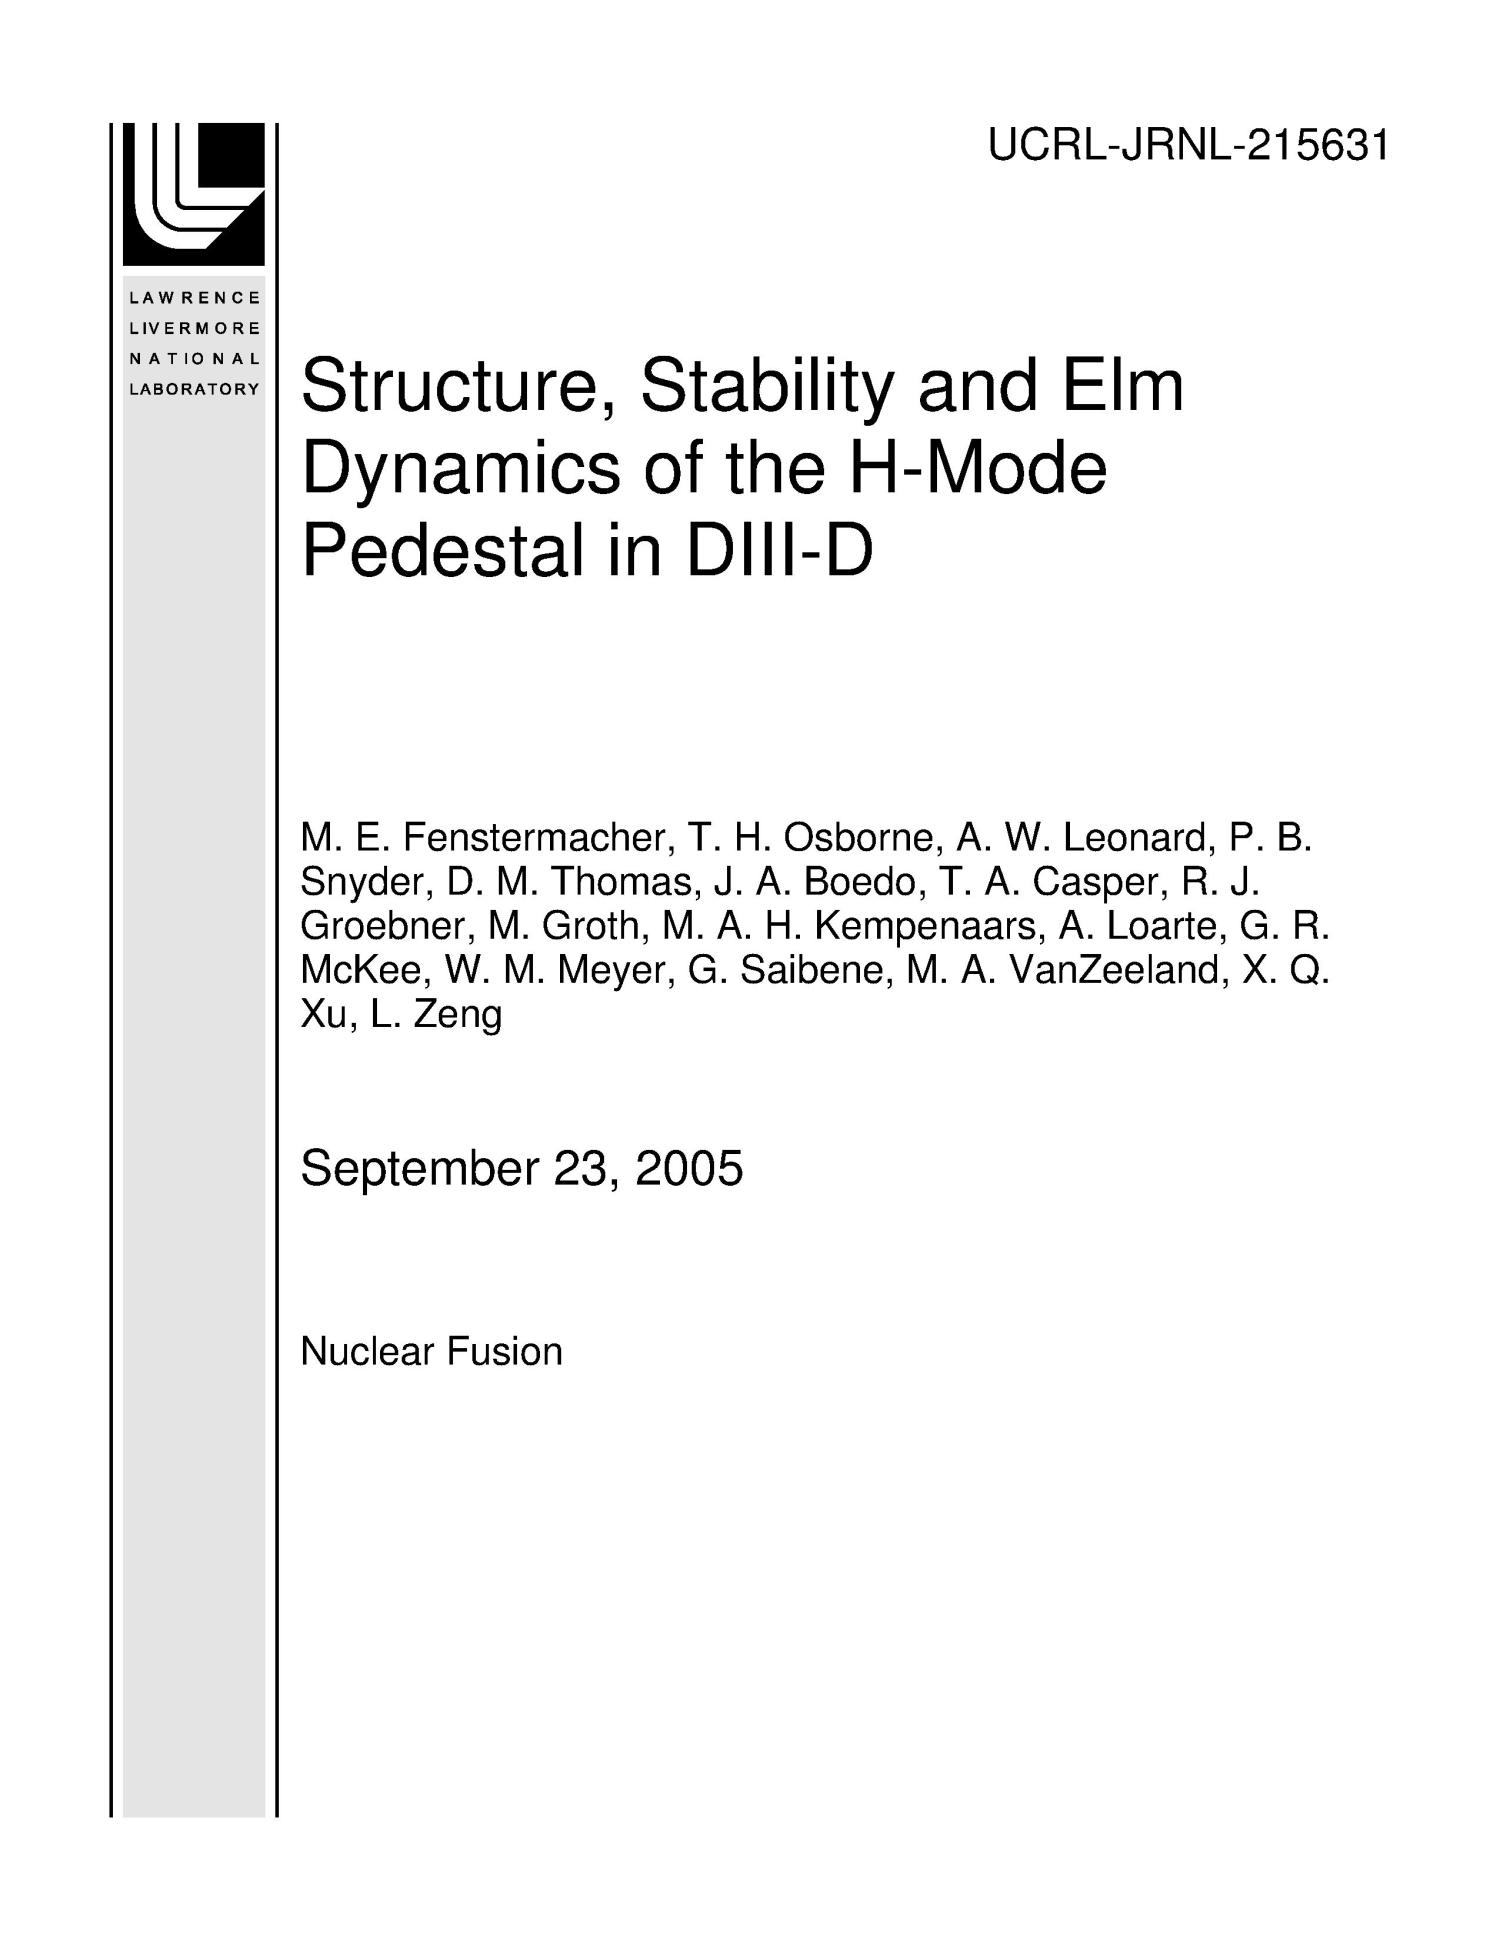 Structure Stability And Elm Dynamics Of The H Mode Pedestal In Diii D Unt Digital Library